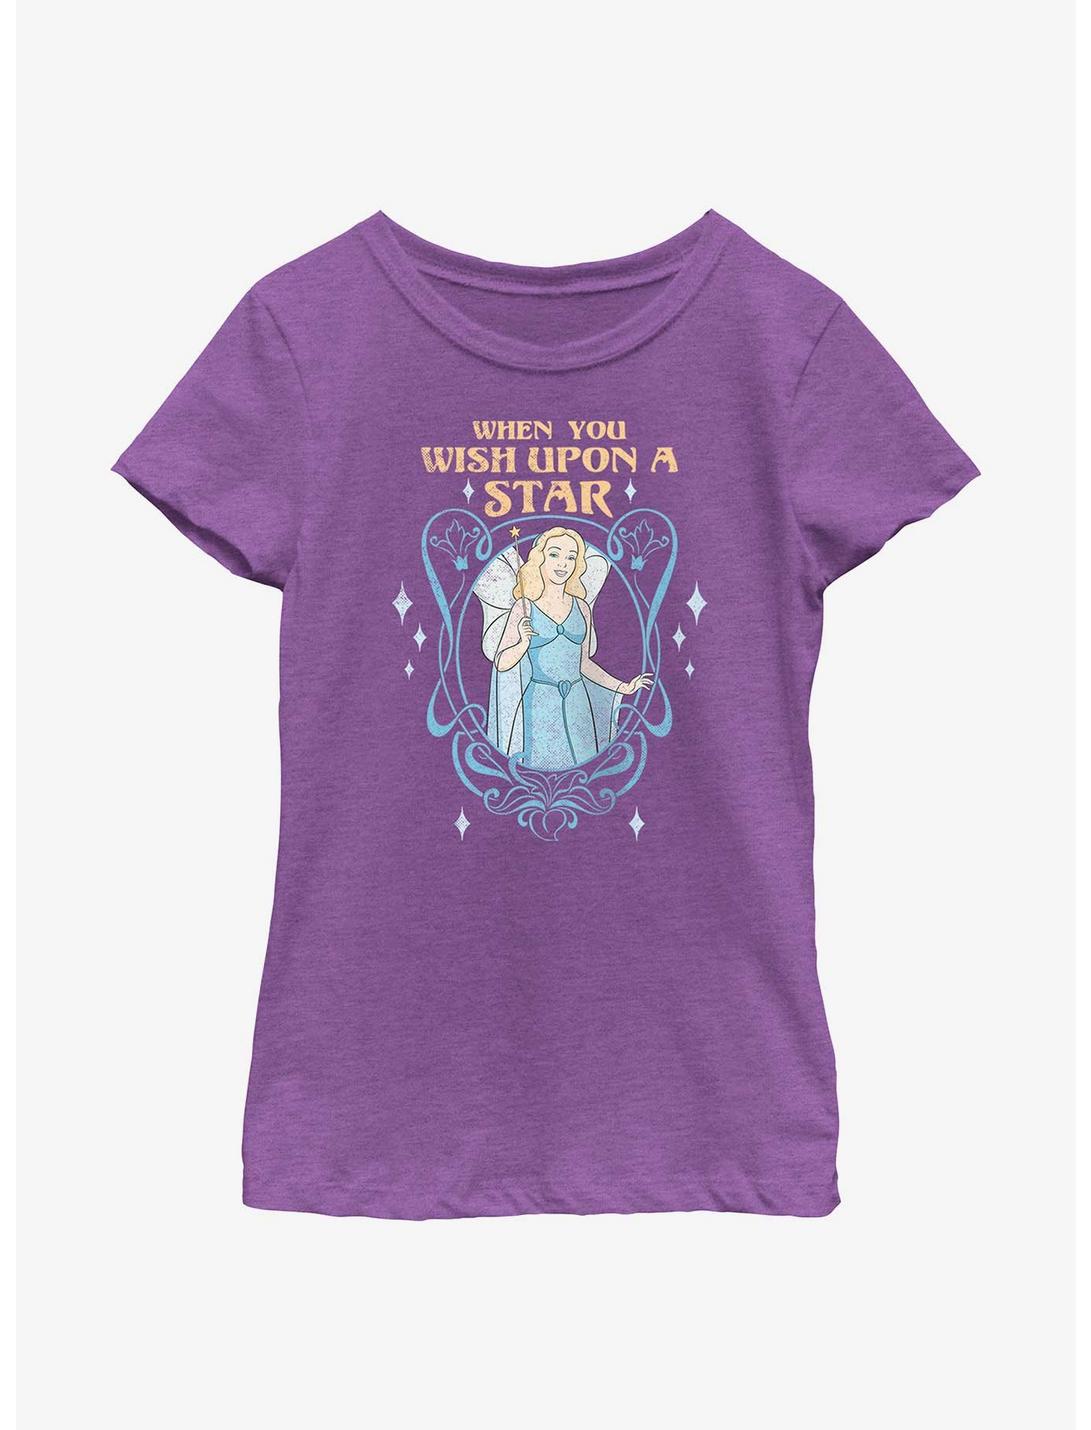 Disney Pinocchio The Blue Fairy Wish Upon A Star Youth Girls T-Shirt, PURPLE BERRY, hi-res